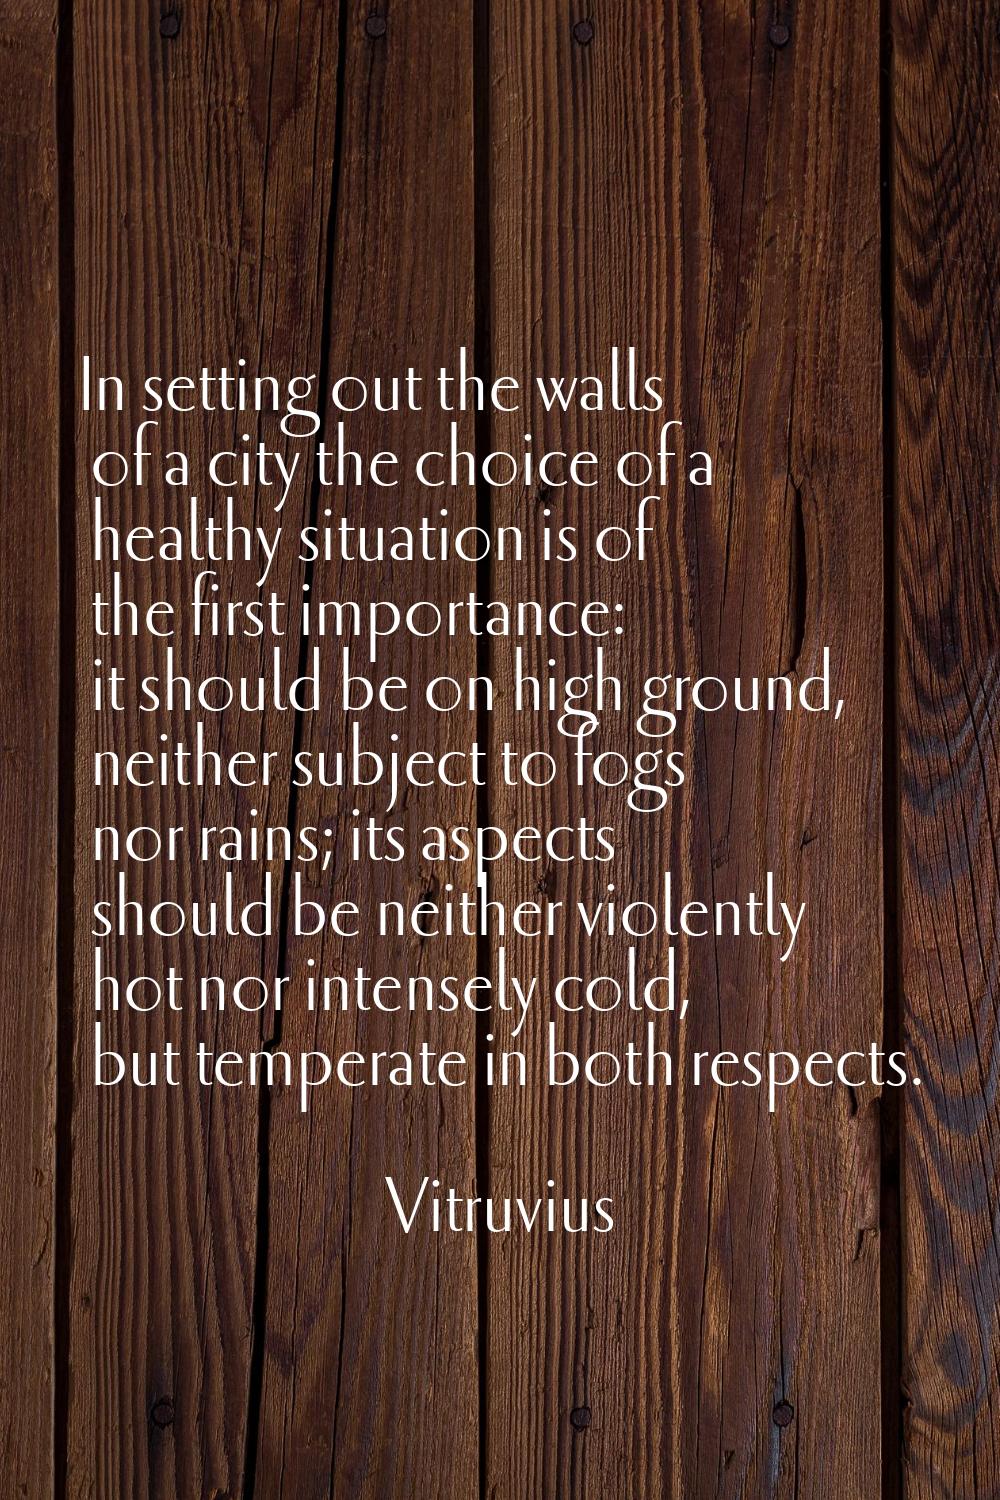 In setting out the walls of a city the choice of a healthy situation is of the first importance: it